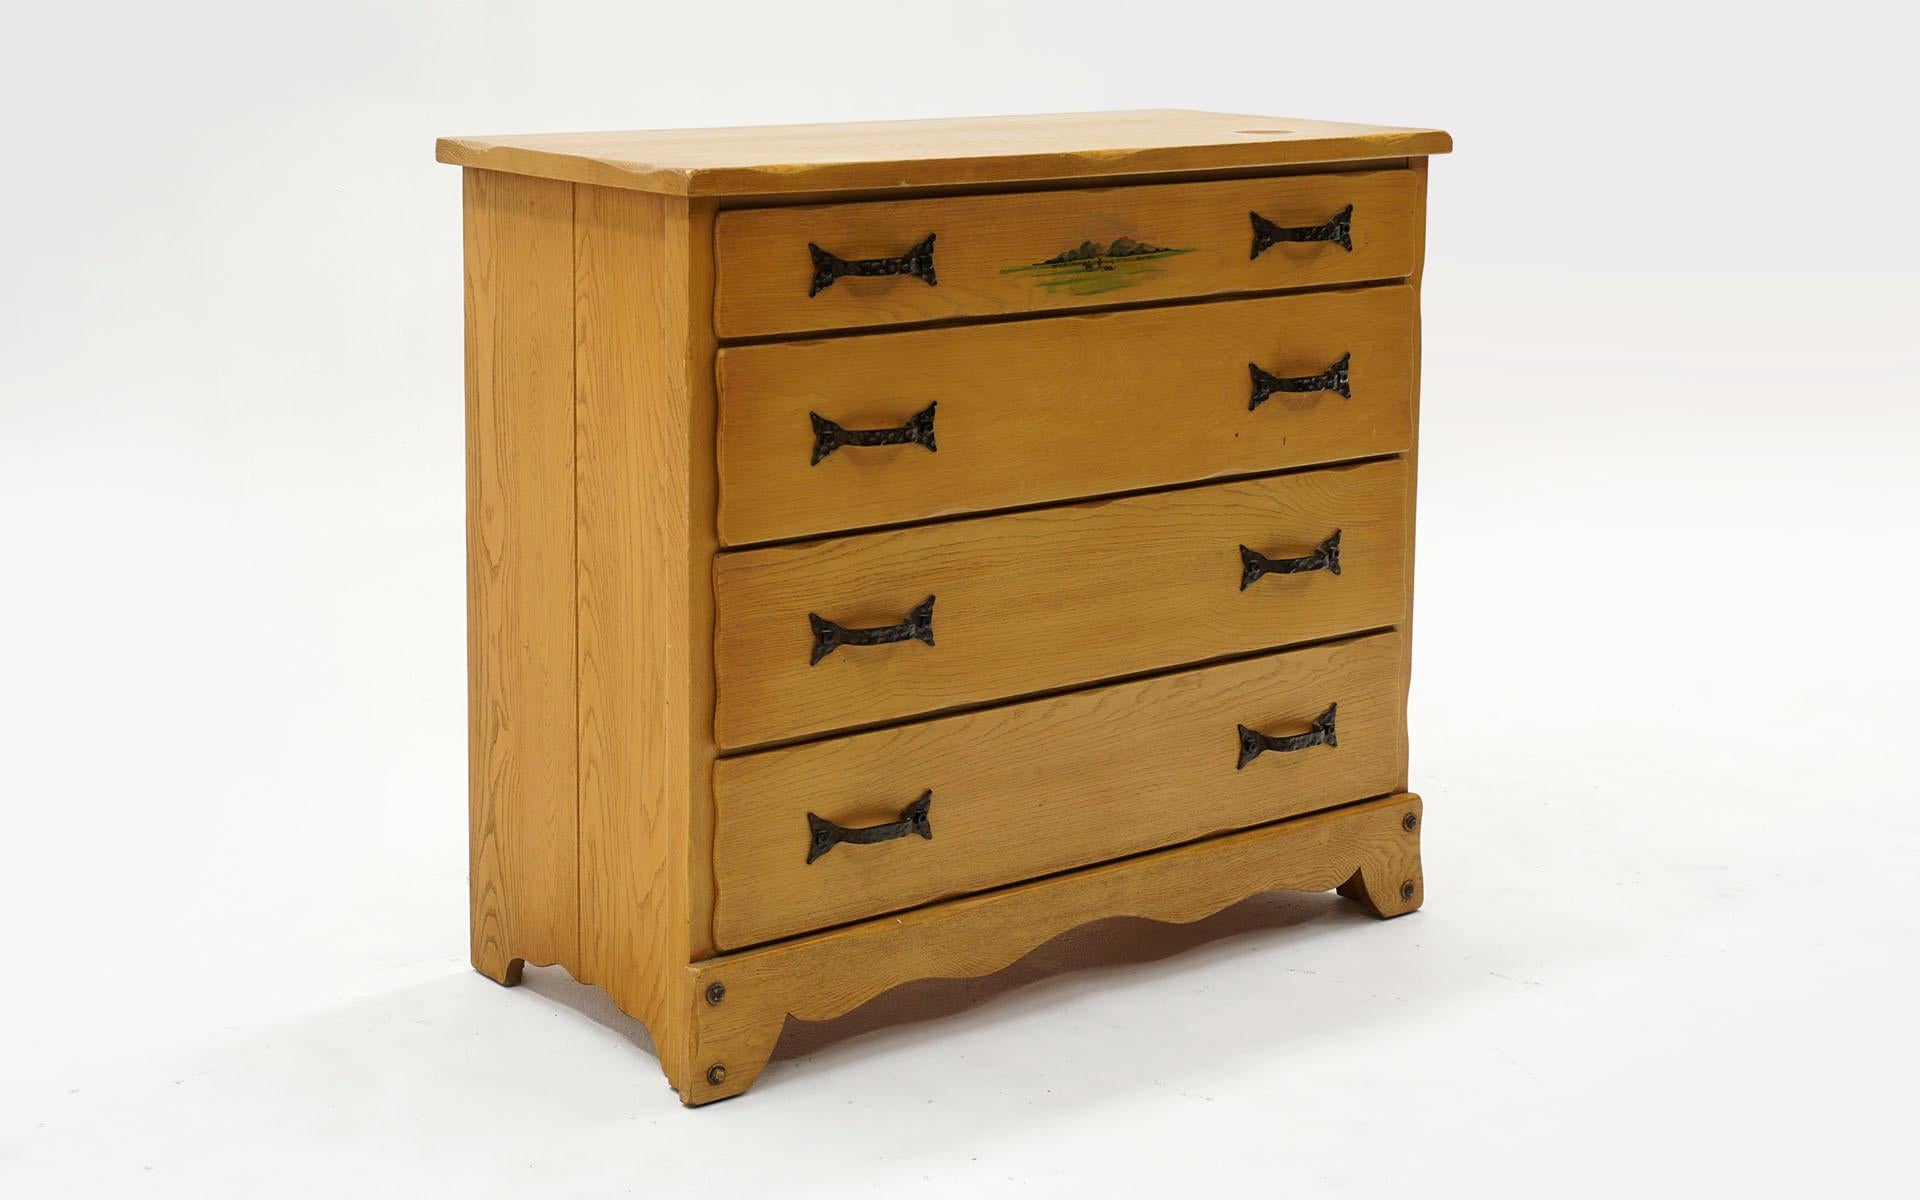 Rancho Monterey four drawer dresser / chest of drawers. Hand crafted and hand hammered pulls. Good condition with a significant blemish on the top as seen in the photos. It is made of solid oak so is relatively easy to have the top refinished. Rare